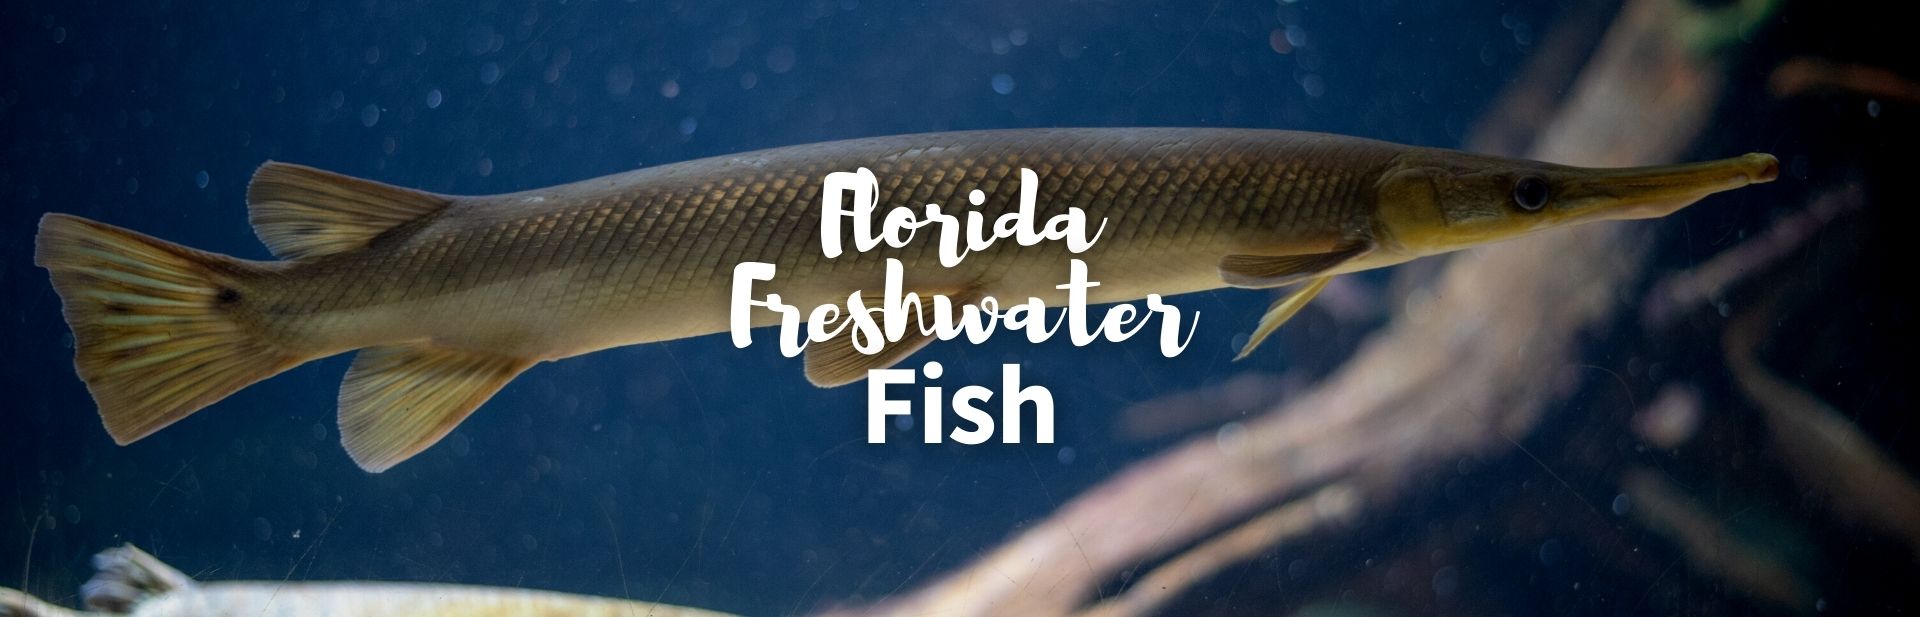 15 Florida Freshwater Fish: Photos and Facts